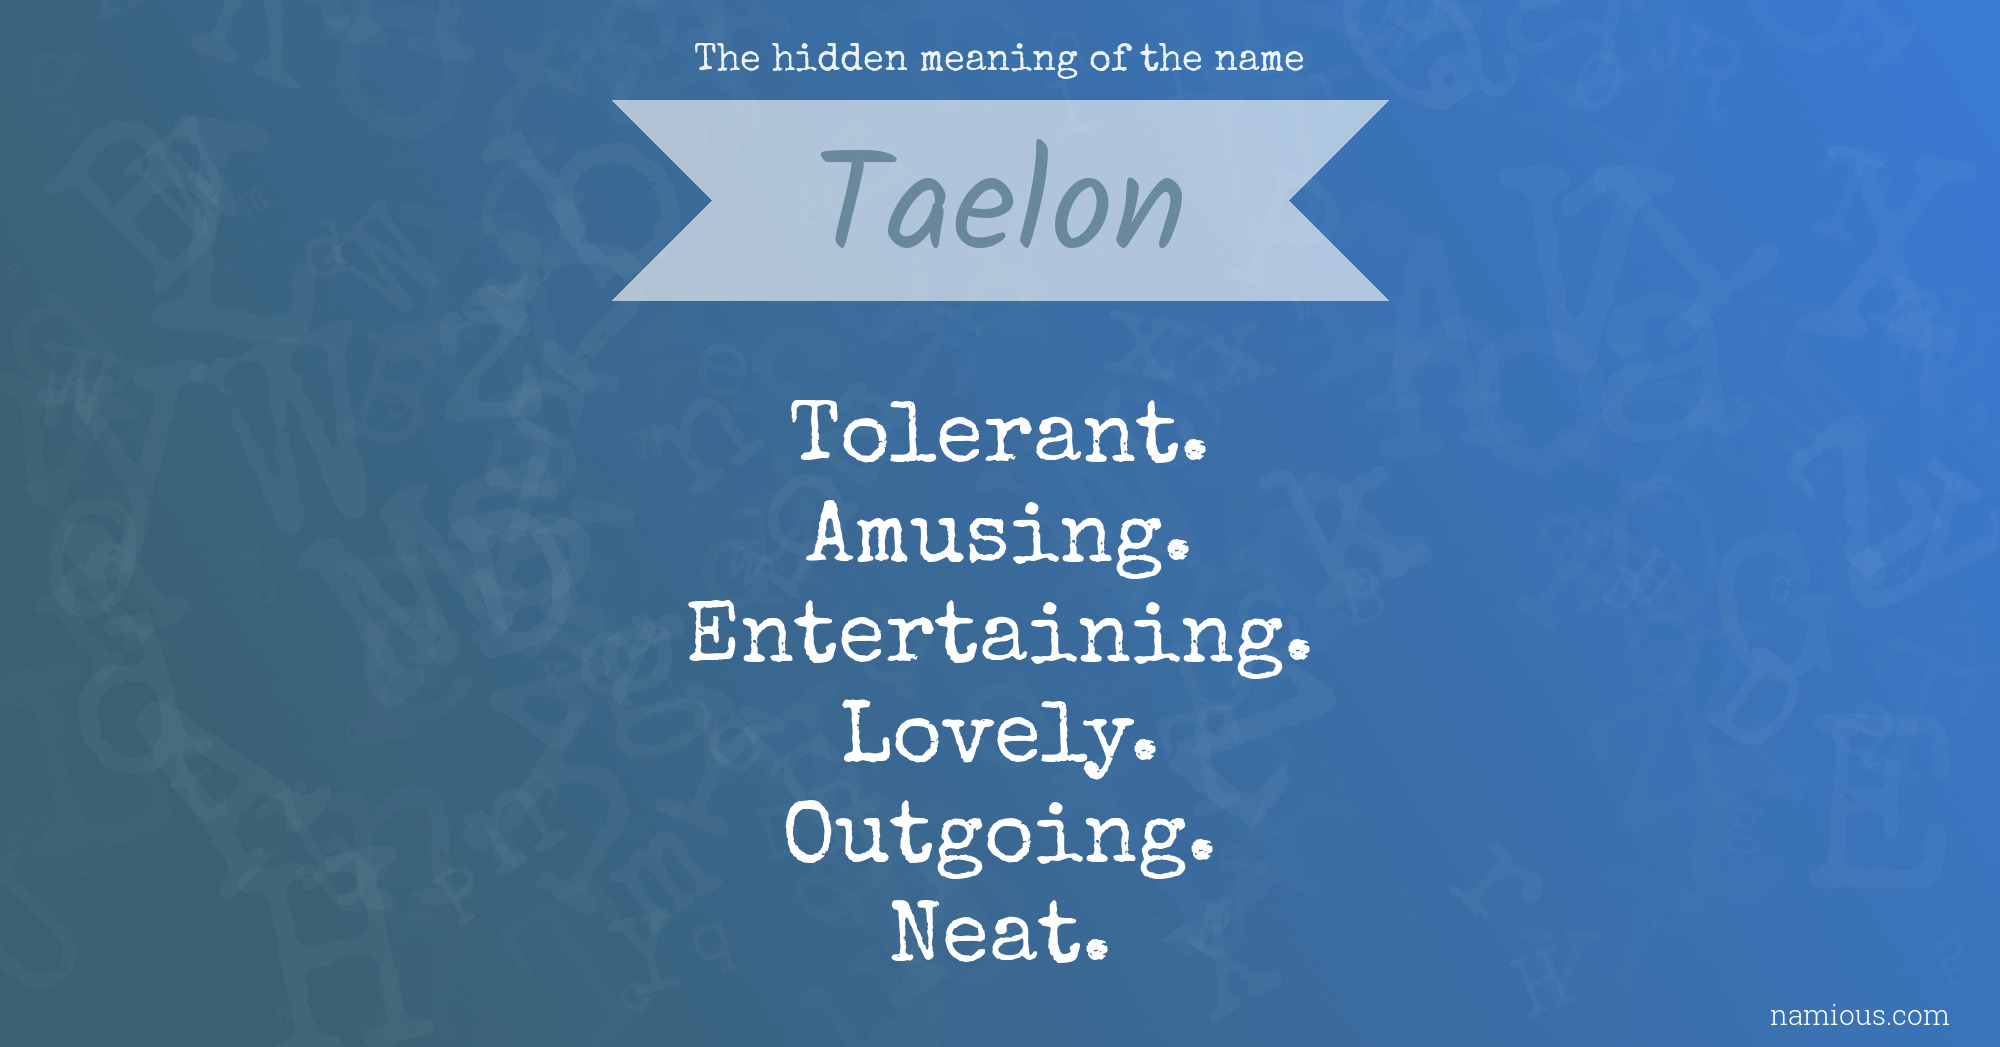 The hidden meaning of the name Taelon